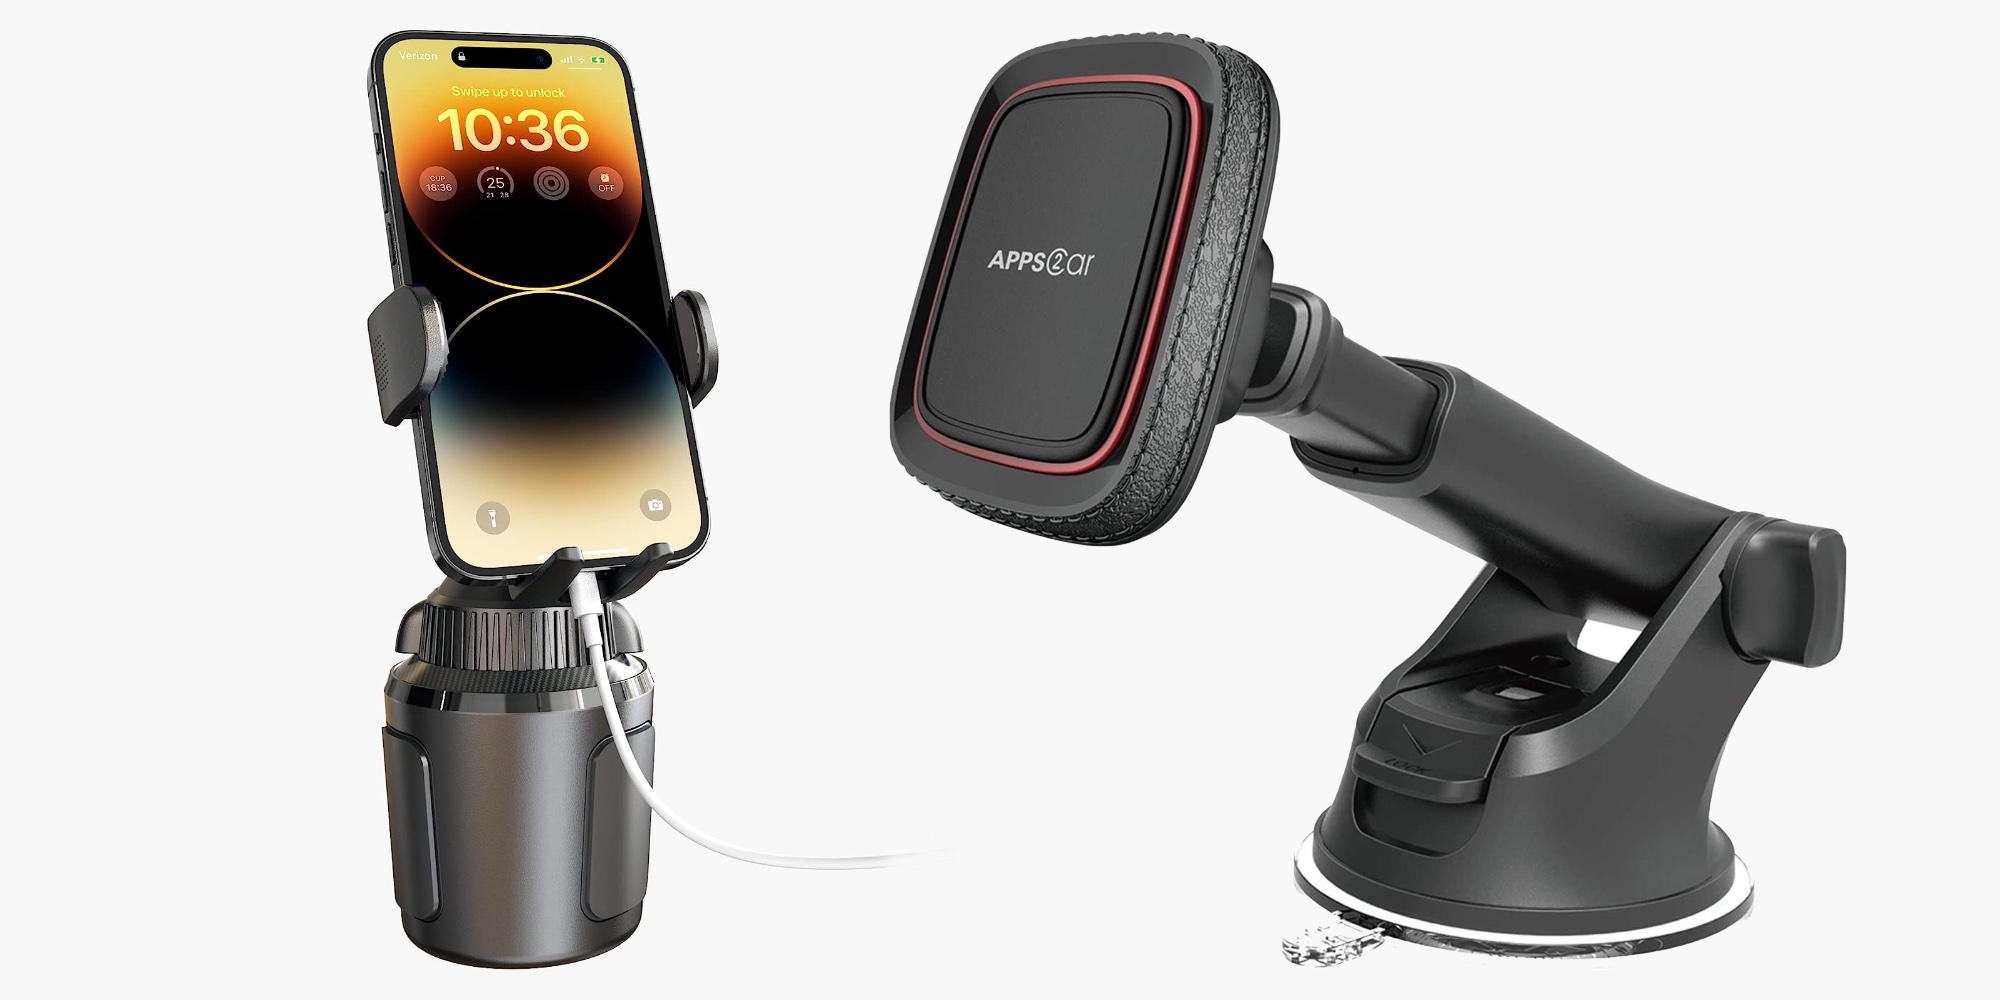 Smartphone Accessories: APPS2Car iPhone and Android car mounts from $9, more